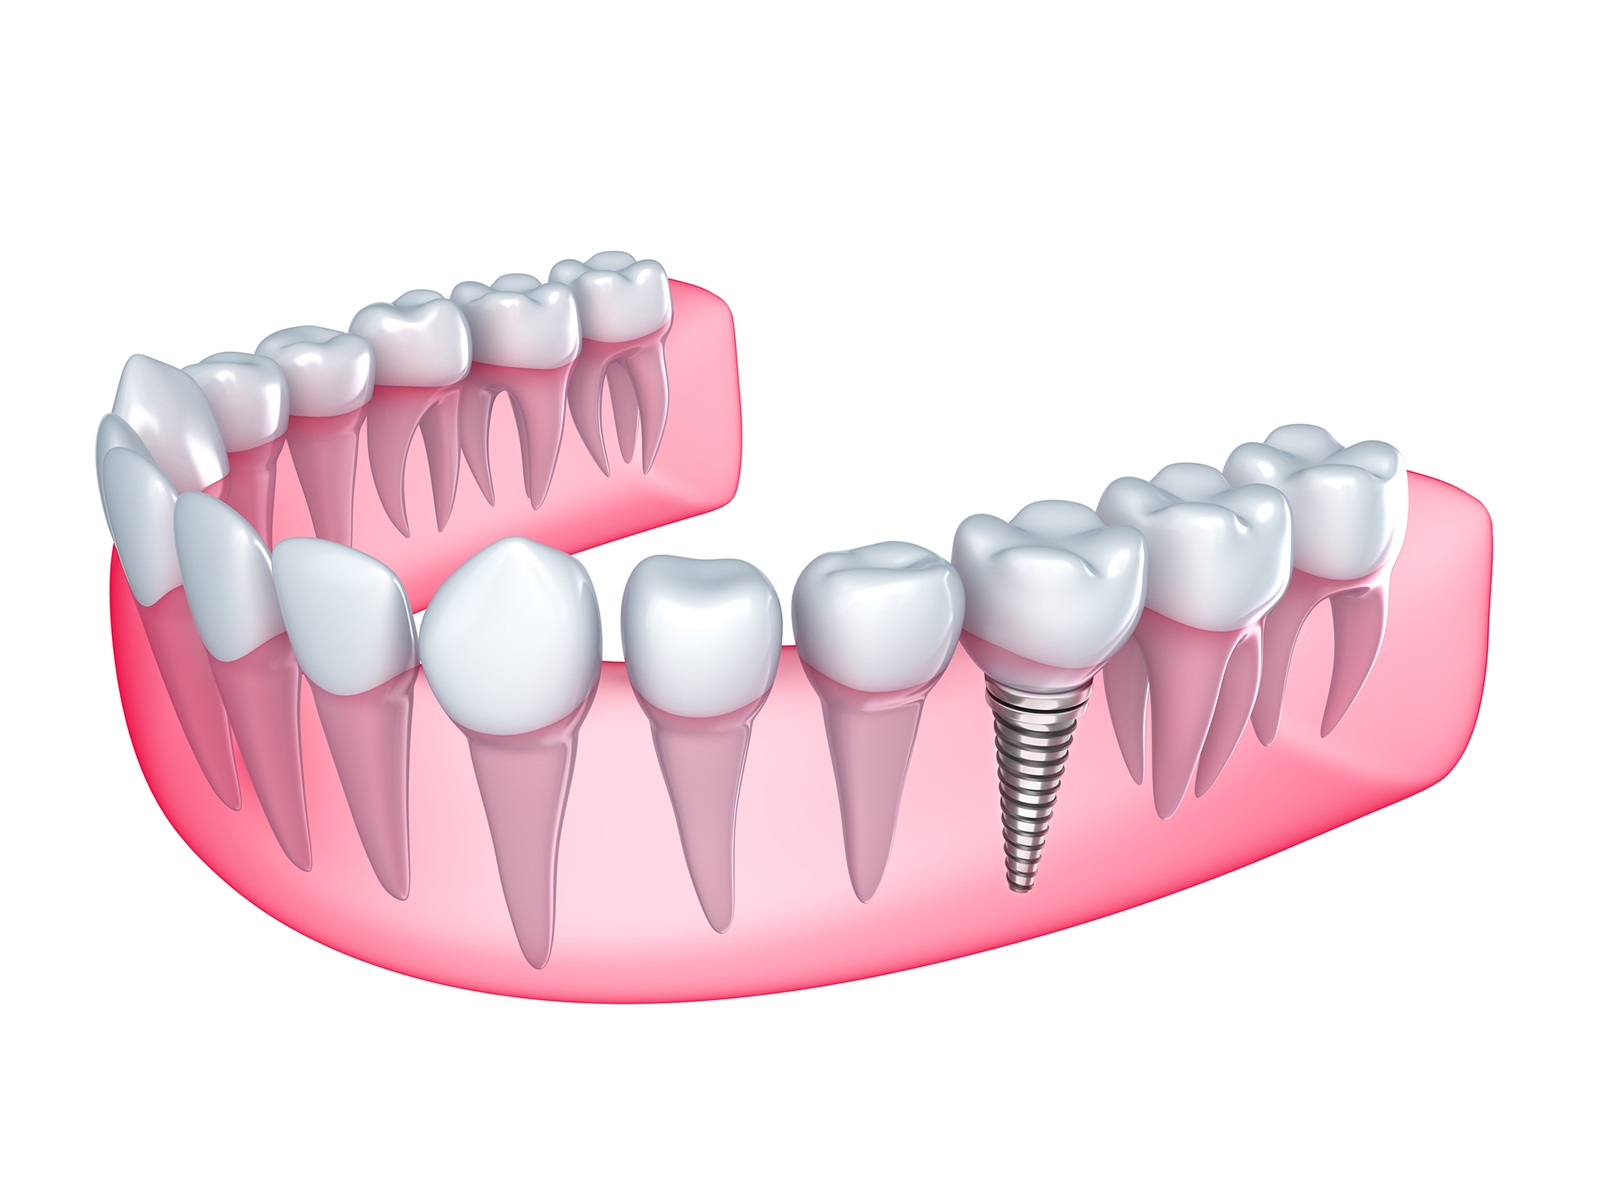 How long after an implant can I get a crown?